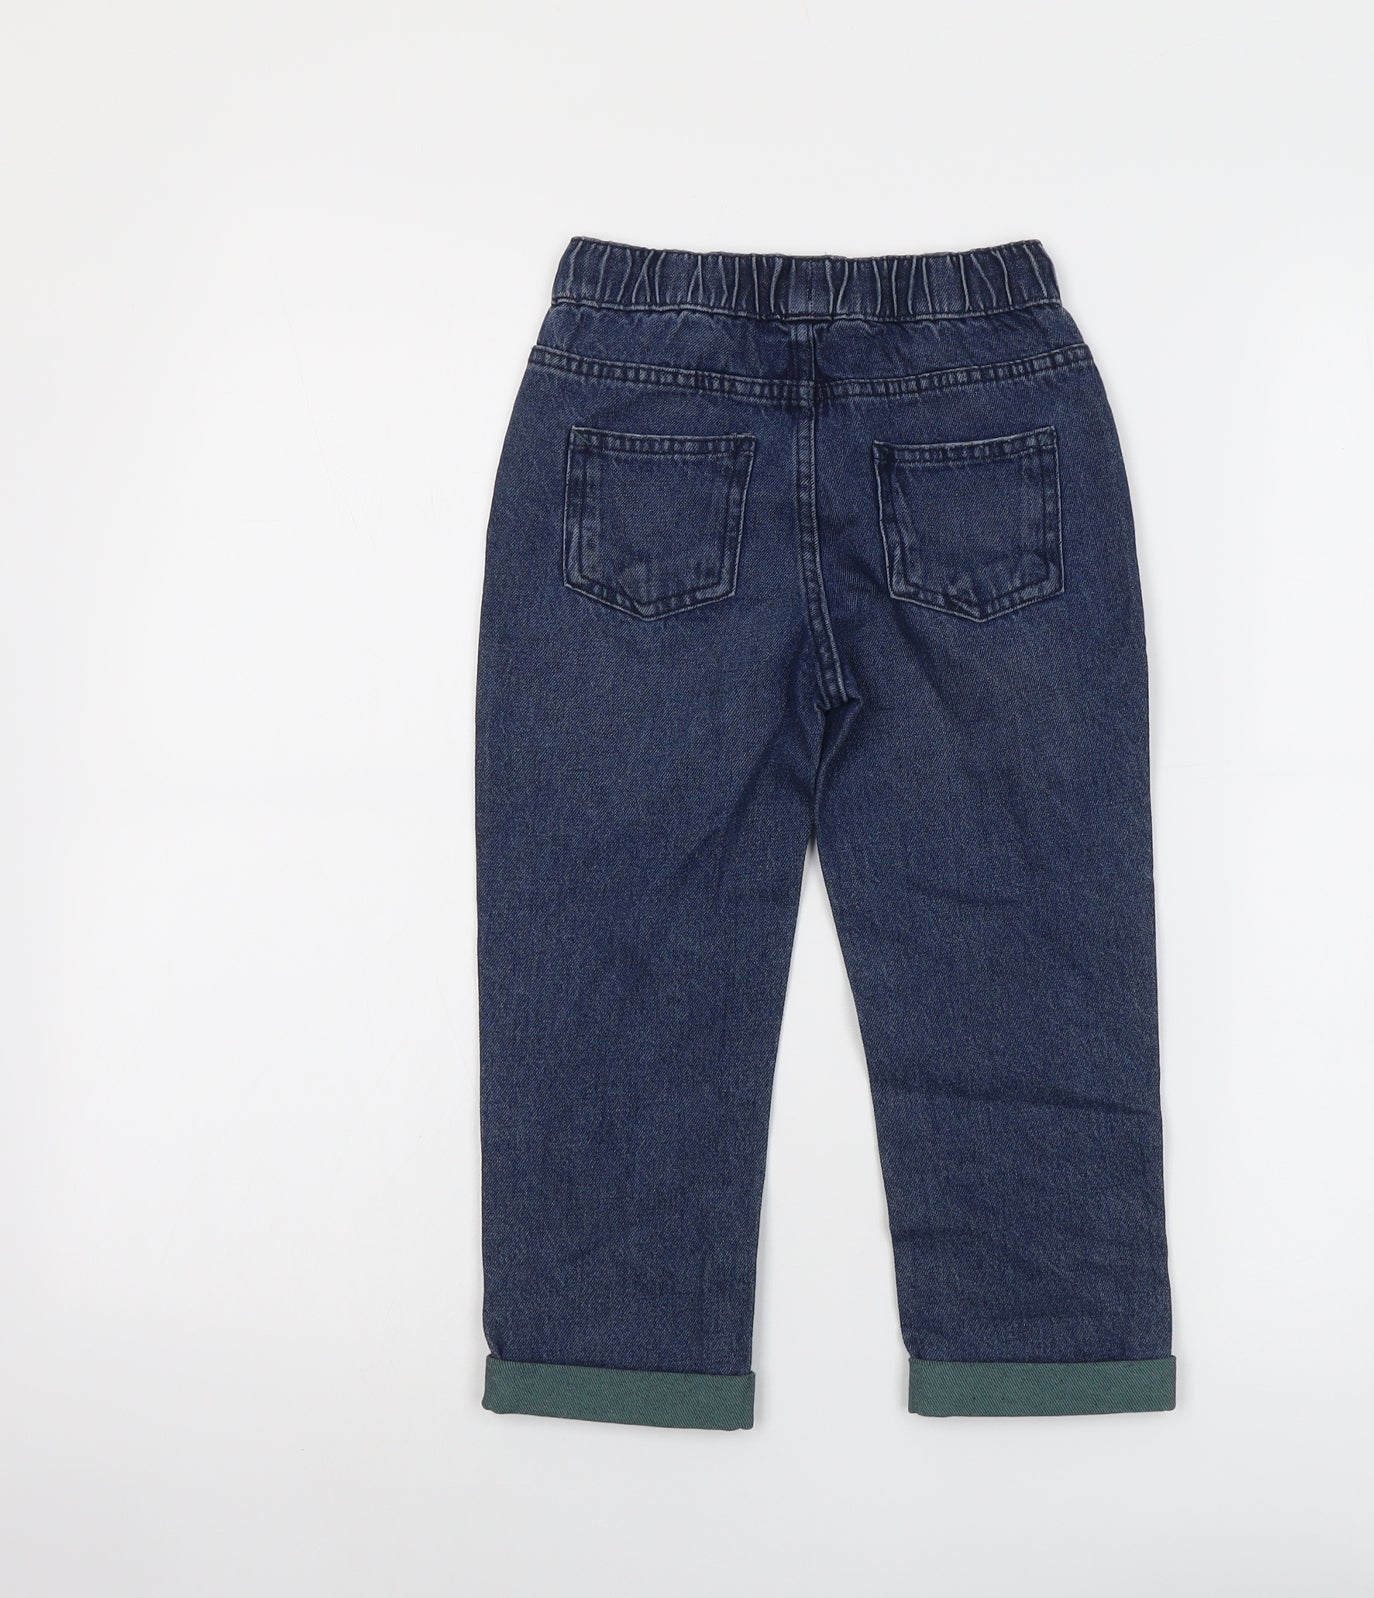 Marks and Spencer Boys Blue Cotton Straight Jeans Size 4-5 Years Regular Drawstring